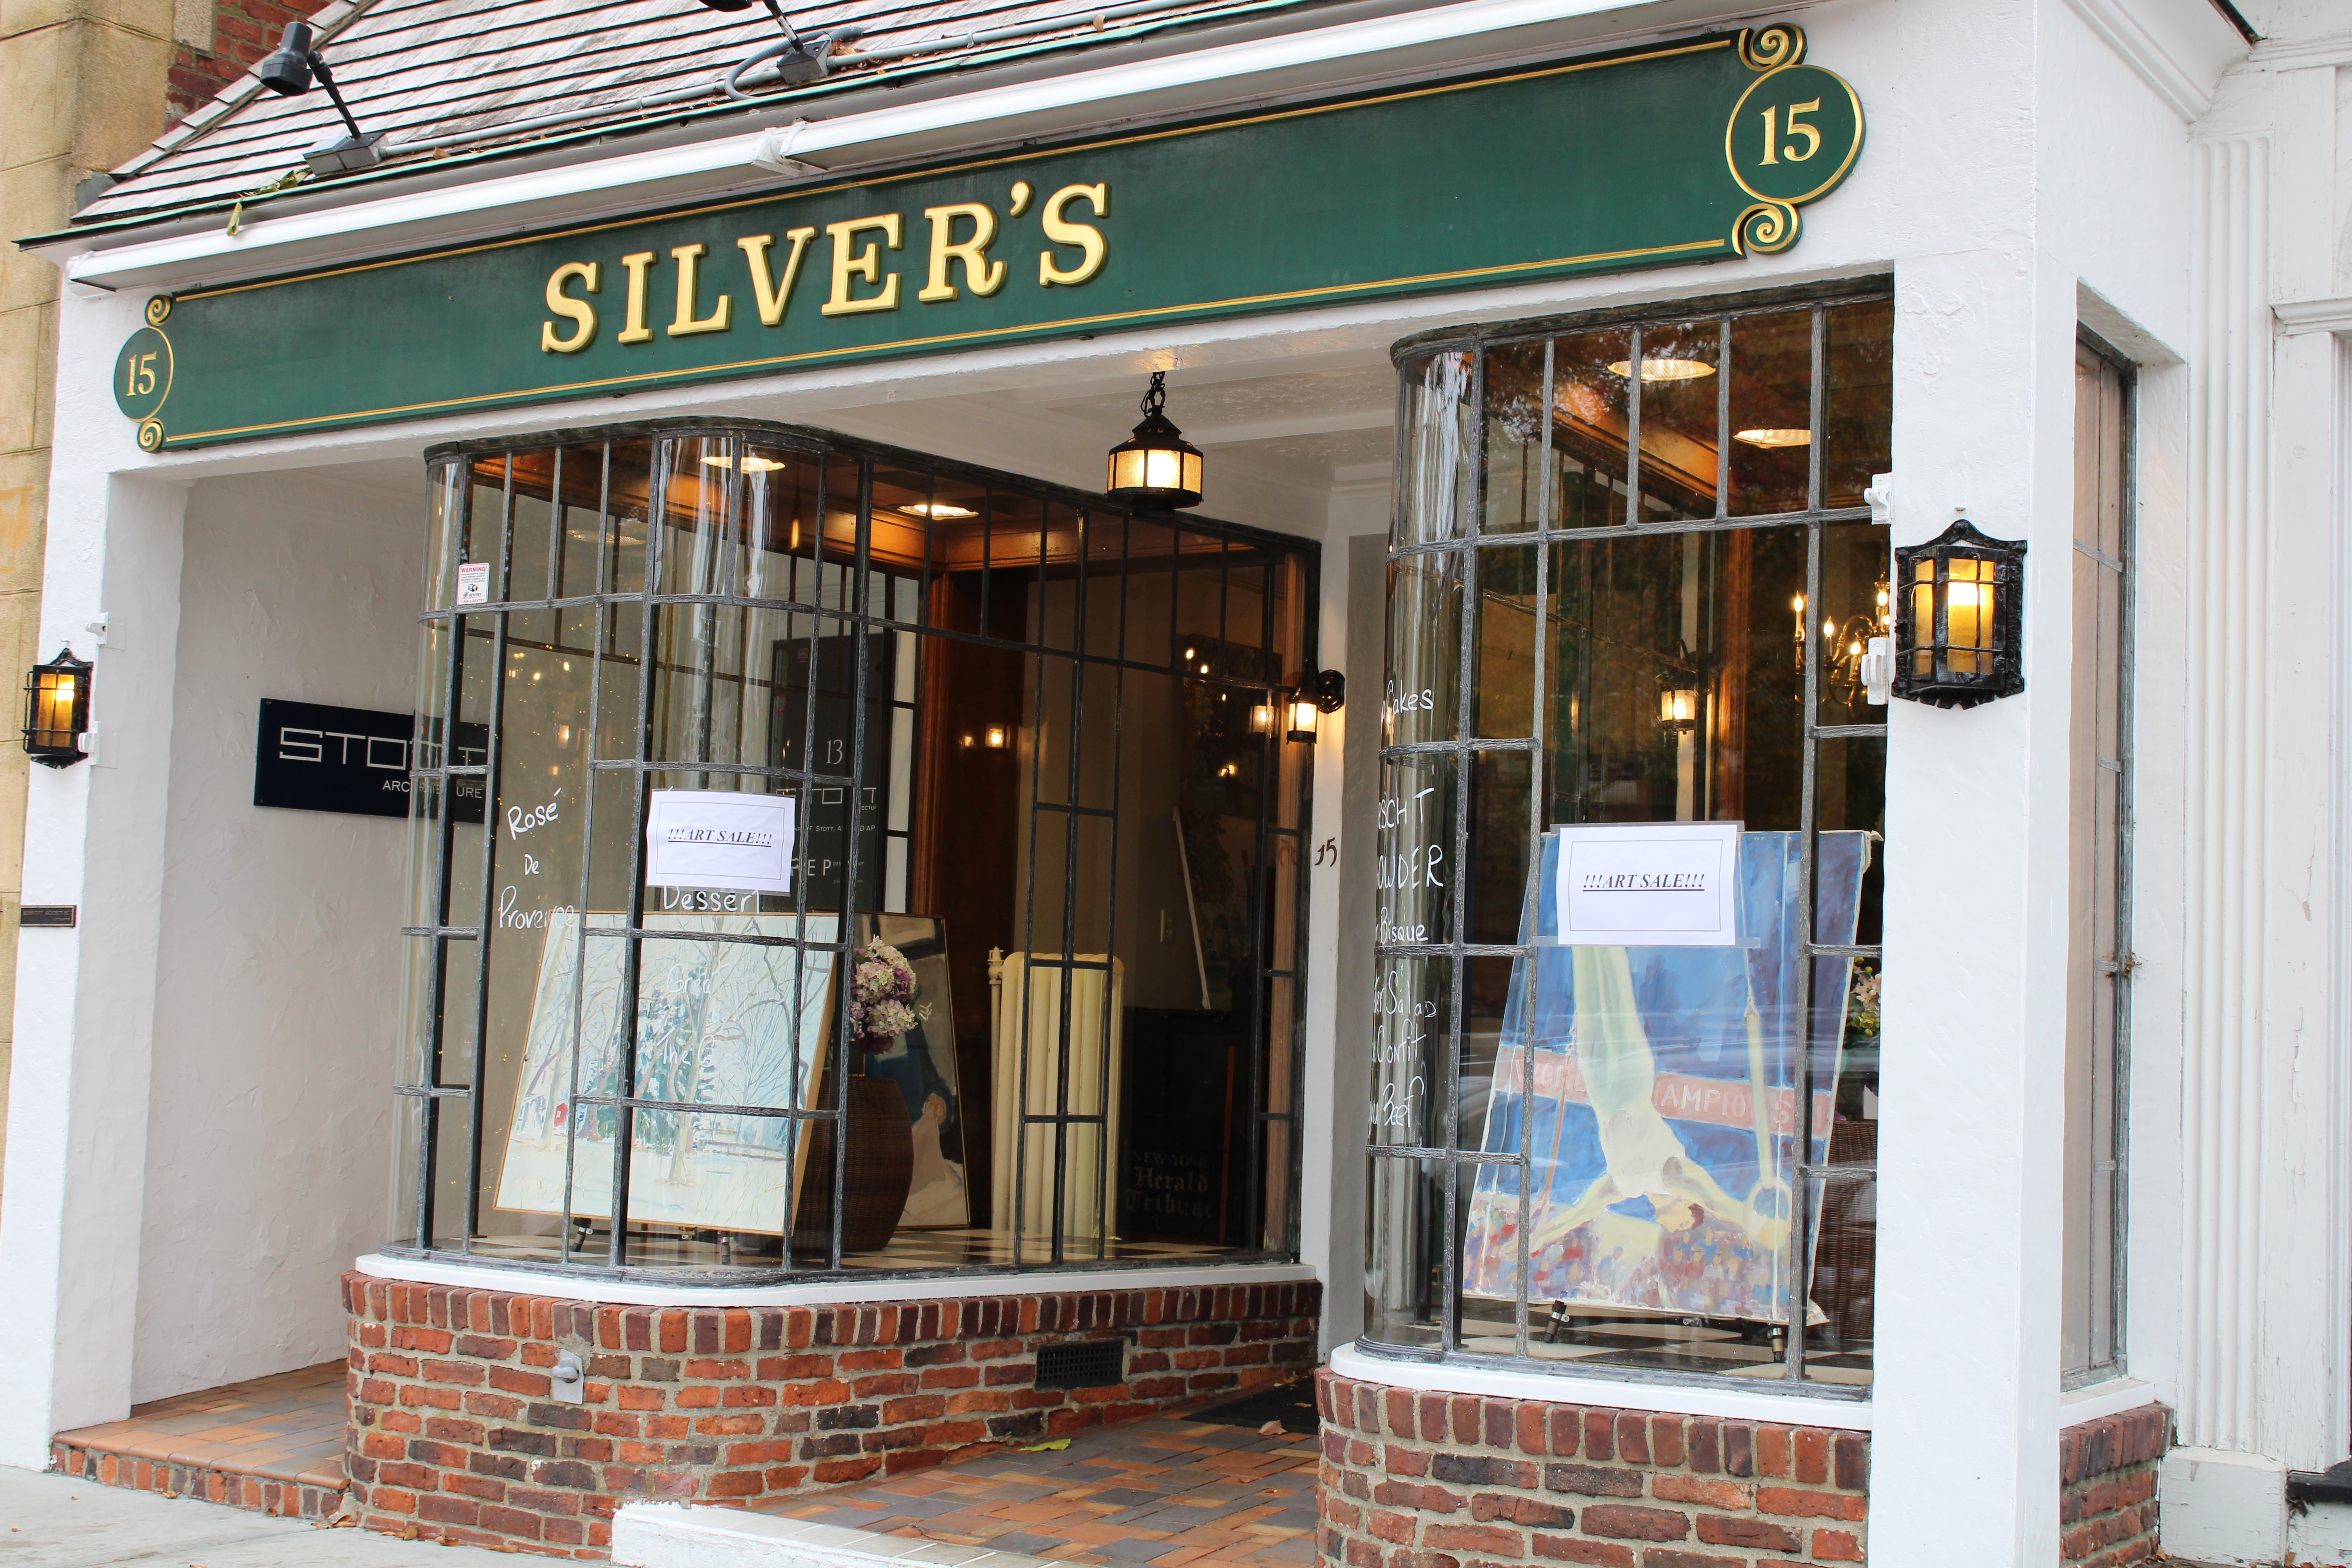 Silver's restaurant closes after 96 years in business, the art in the building is currently for sale.